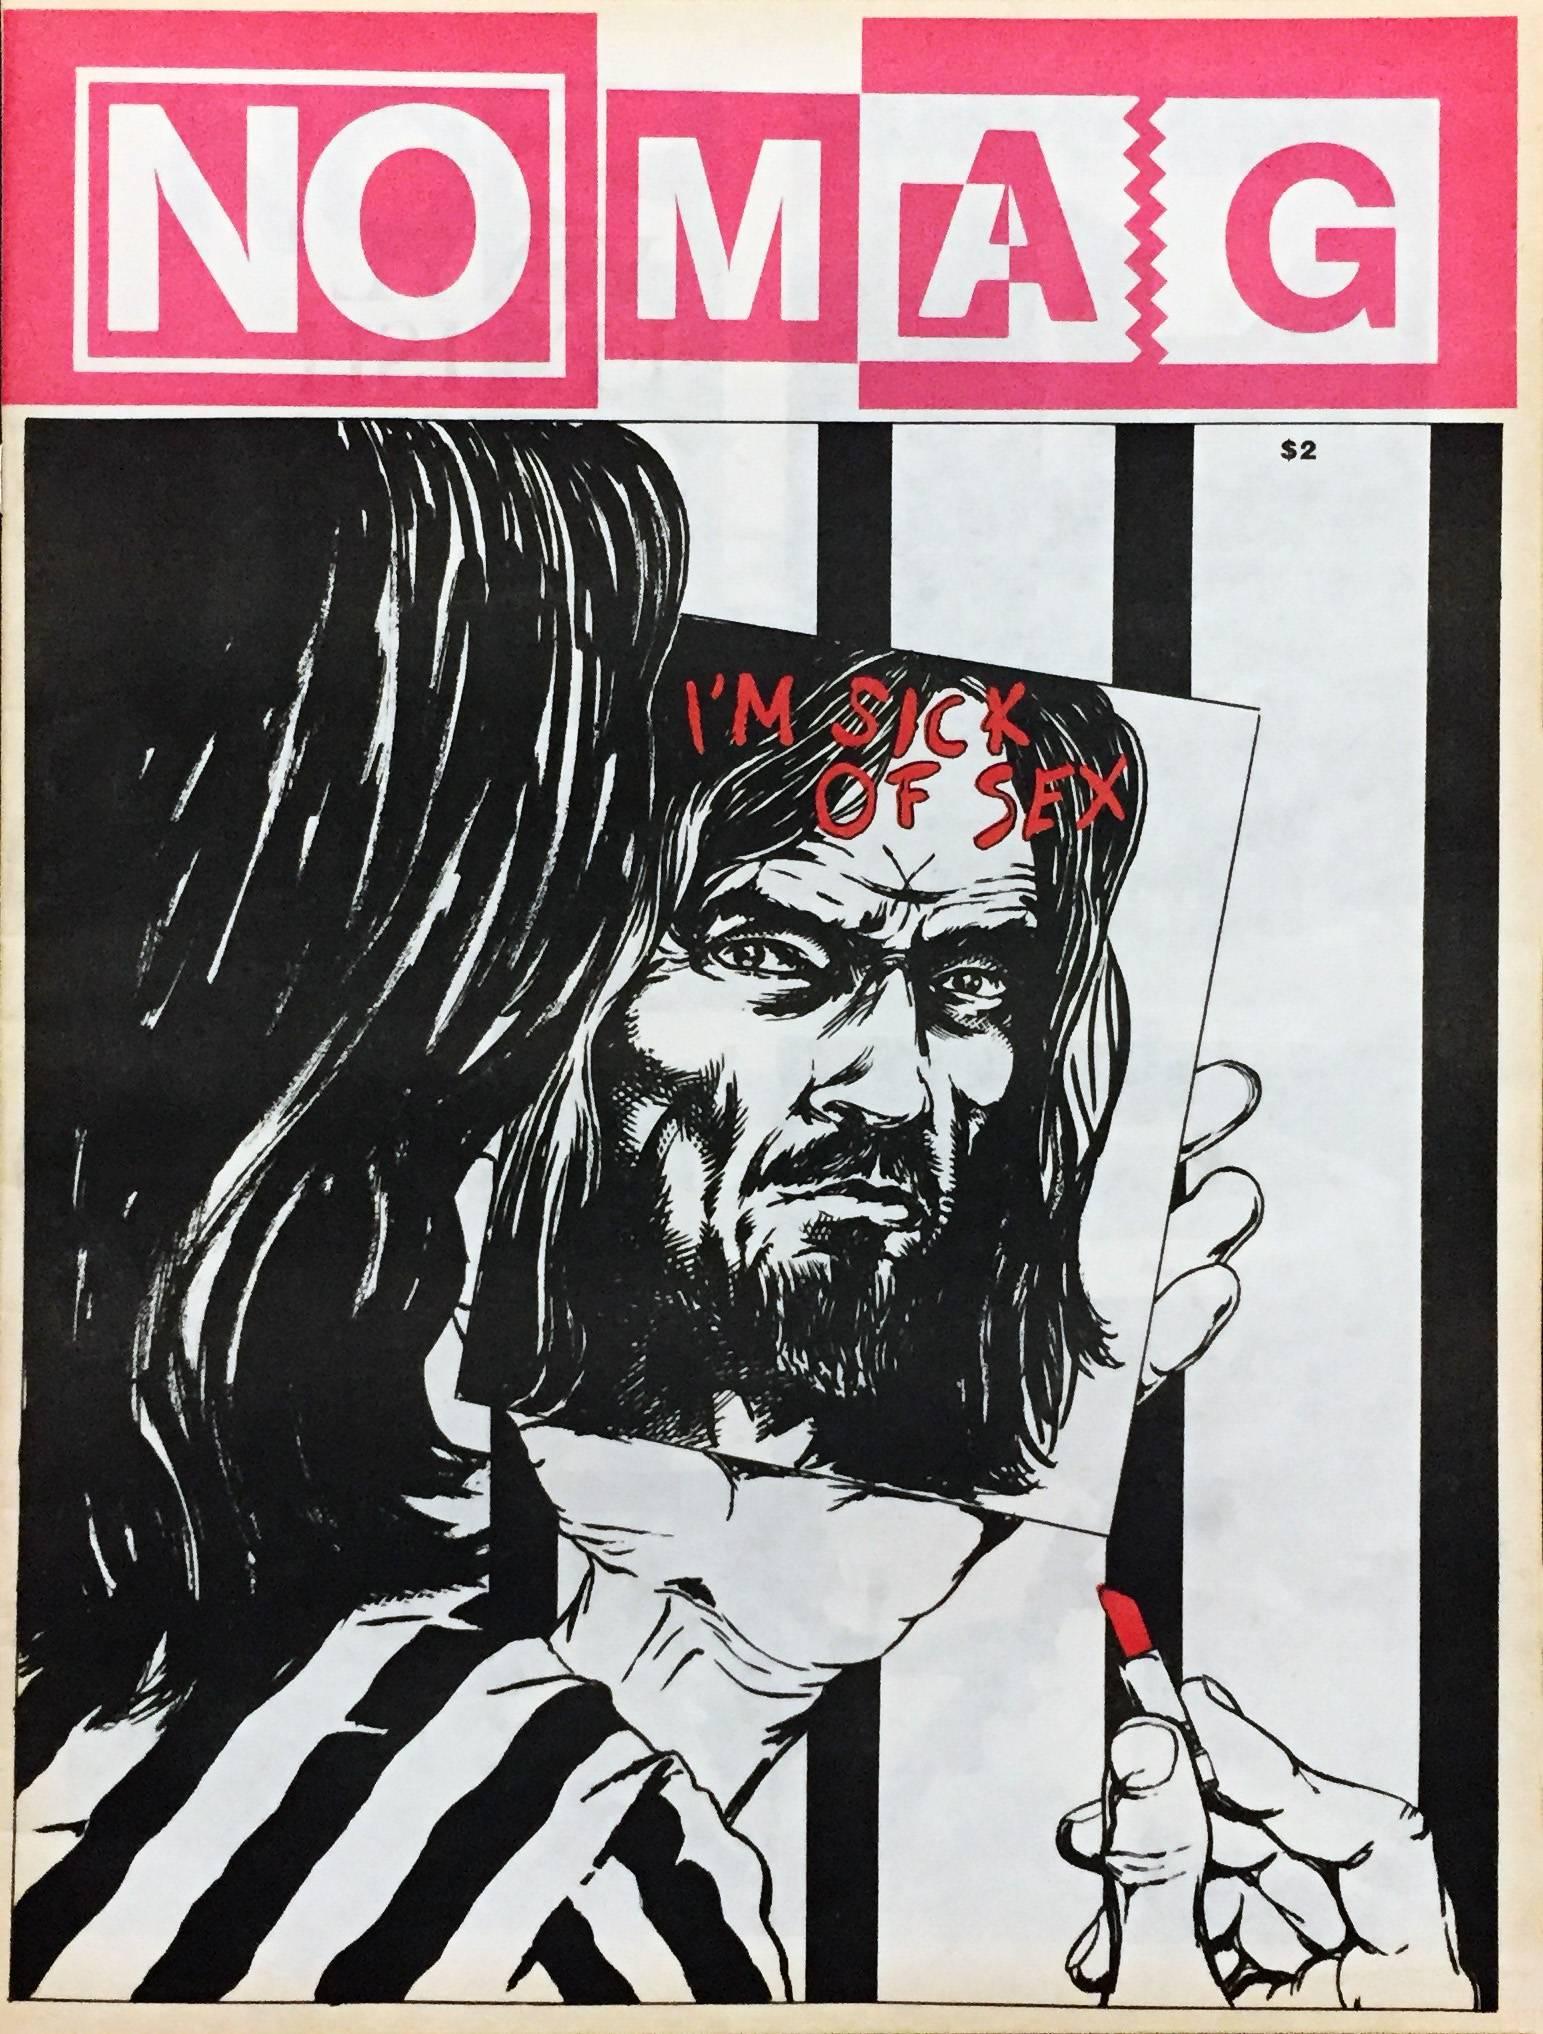 Raymond Pettibon, "No Mag,'" 1981:
A rare late 70's/early 80's Los Angeles Punk scene publication featuring several stand out illustrations by Raymond Pettibon
Medium: Newspaper magazine, offset printed
Minor aging to cover commensurate with age &